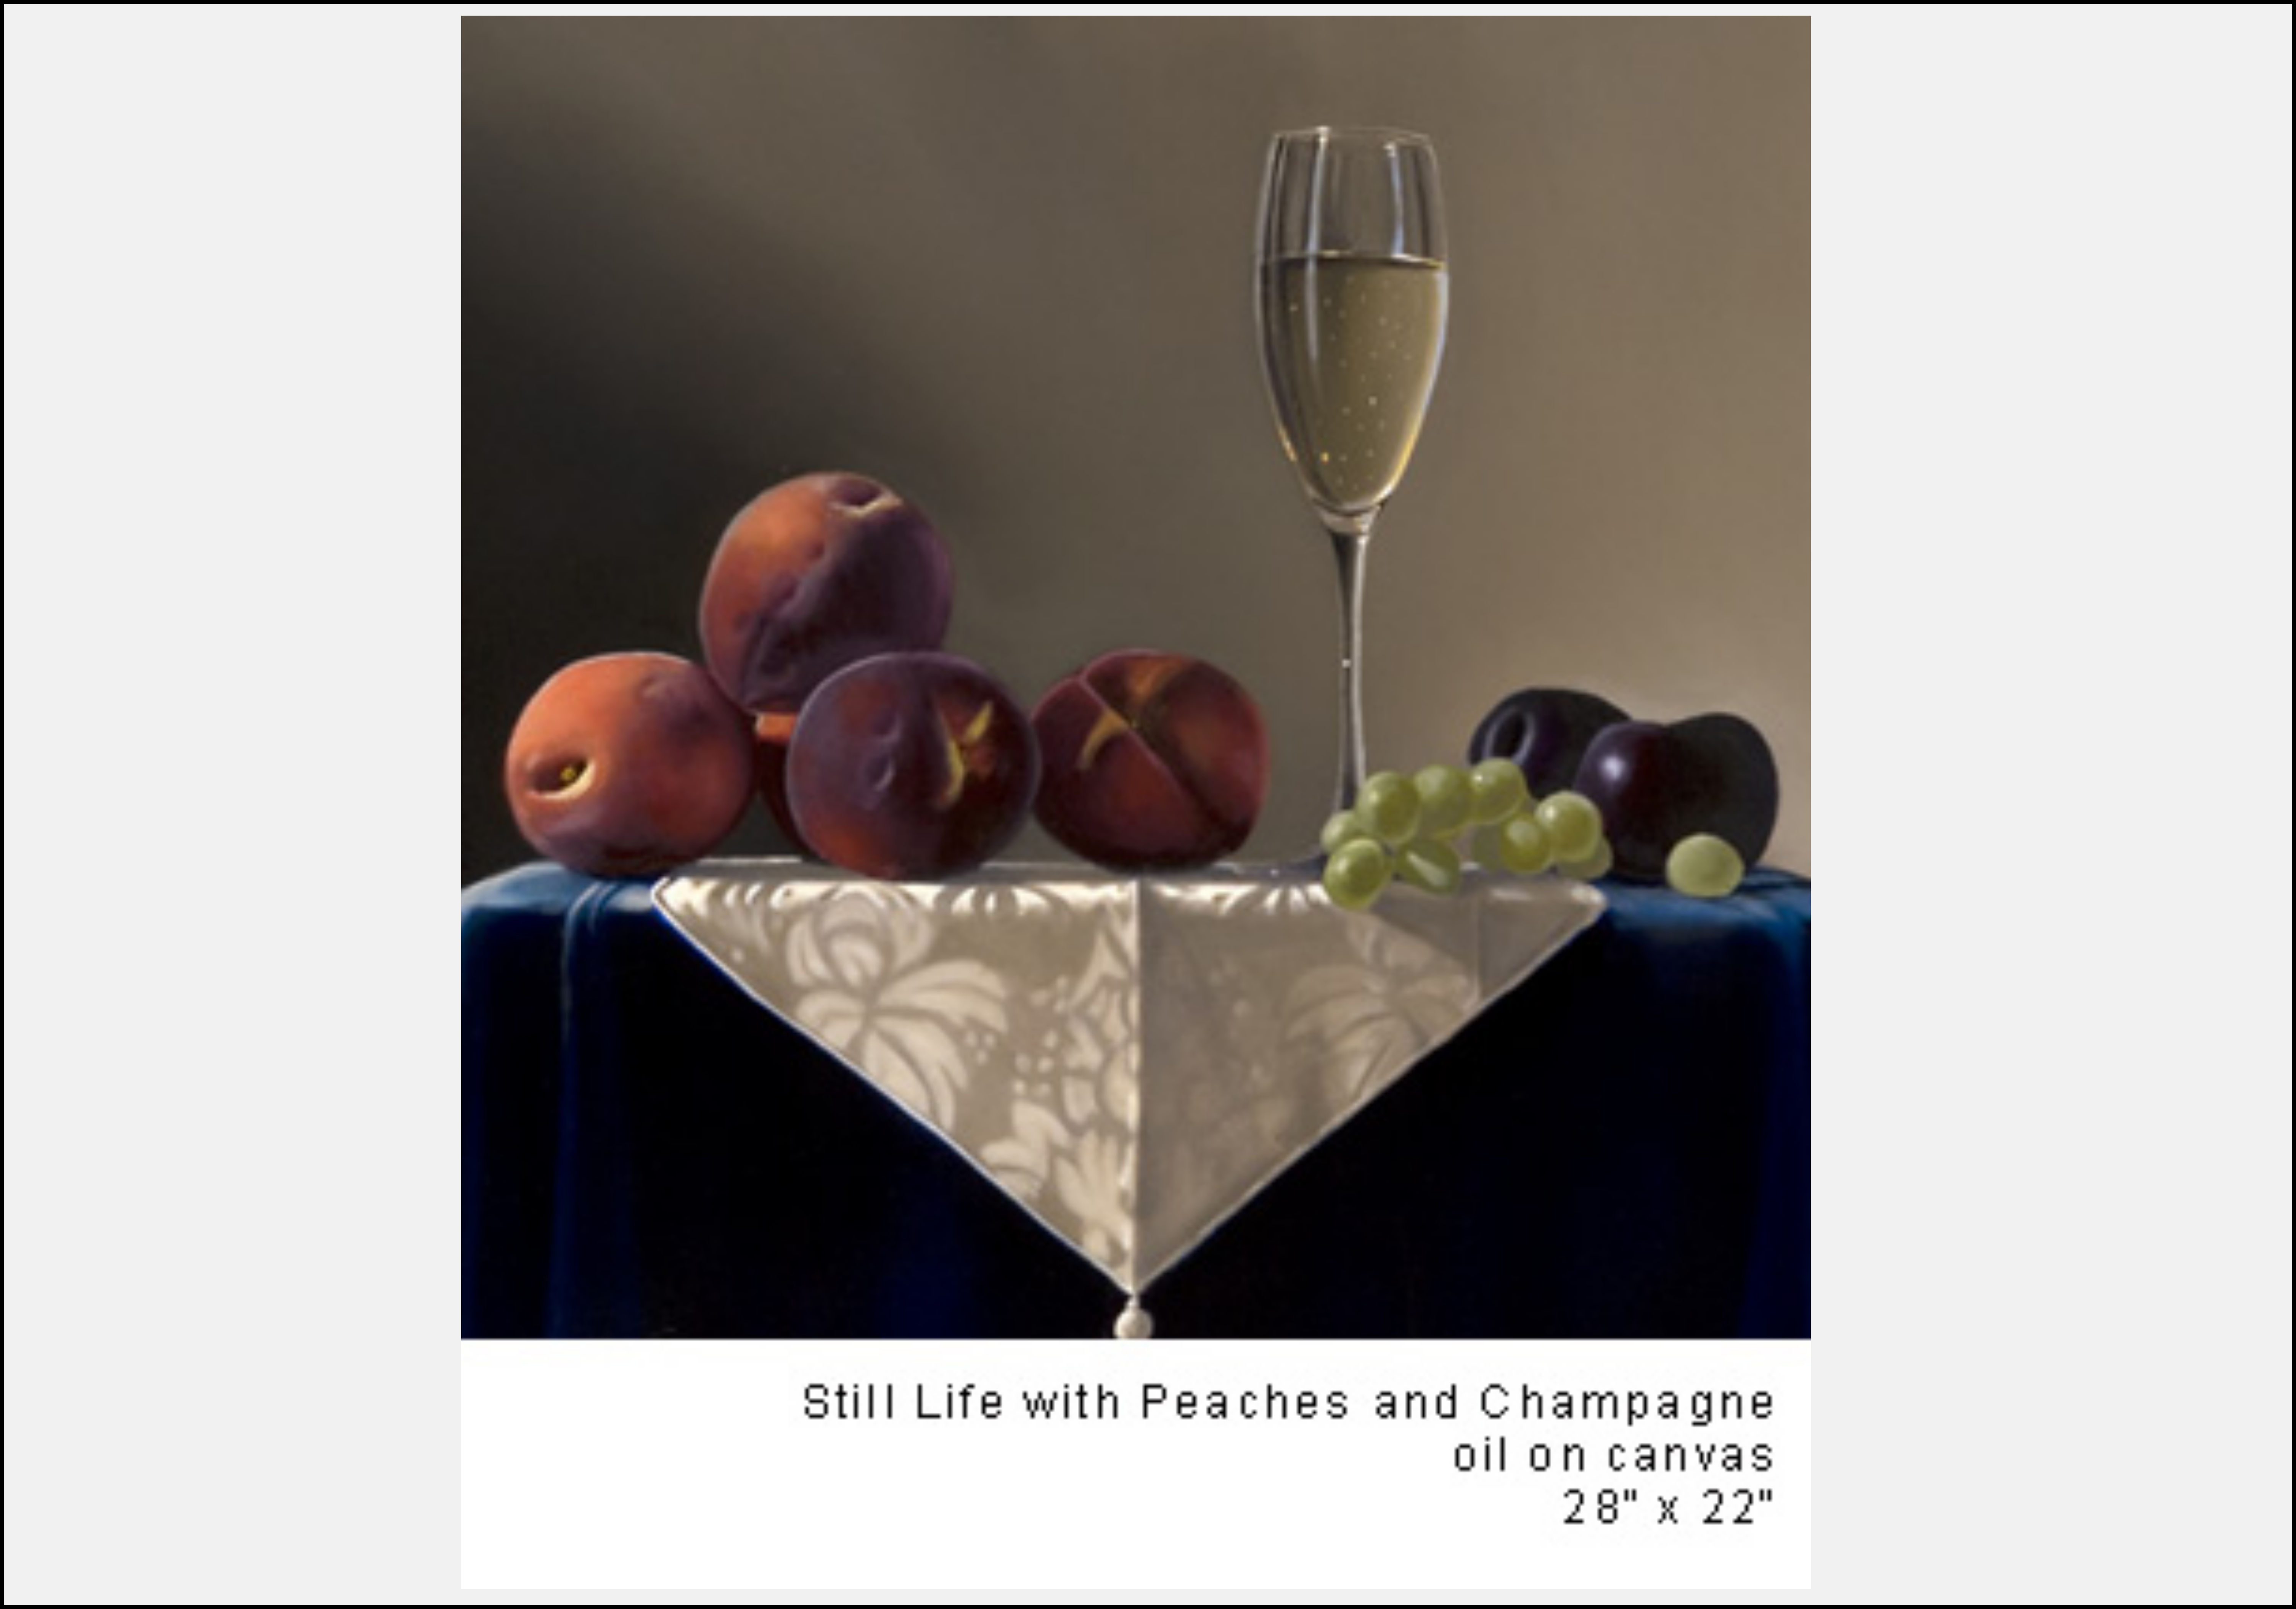 Still Life with Peaches and Champagne